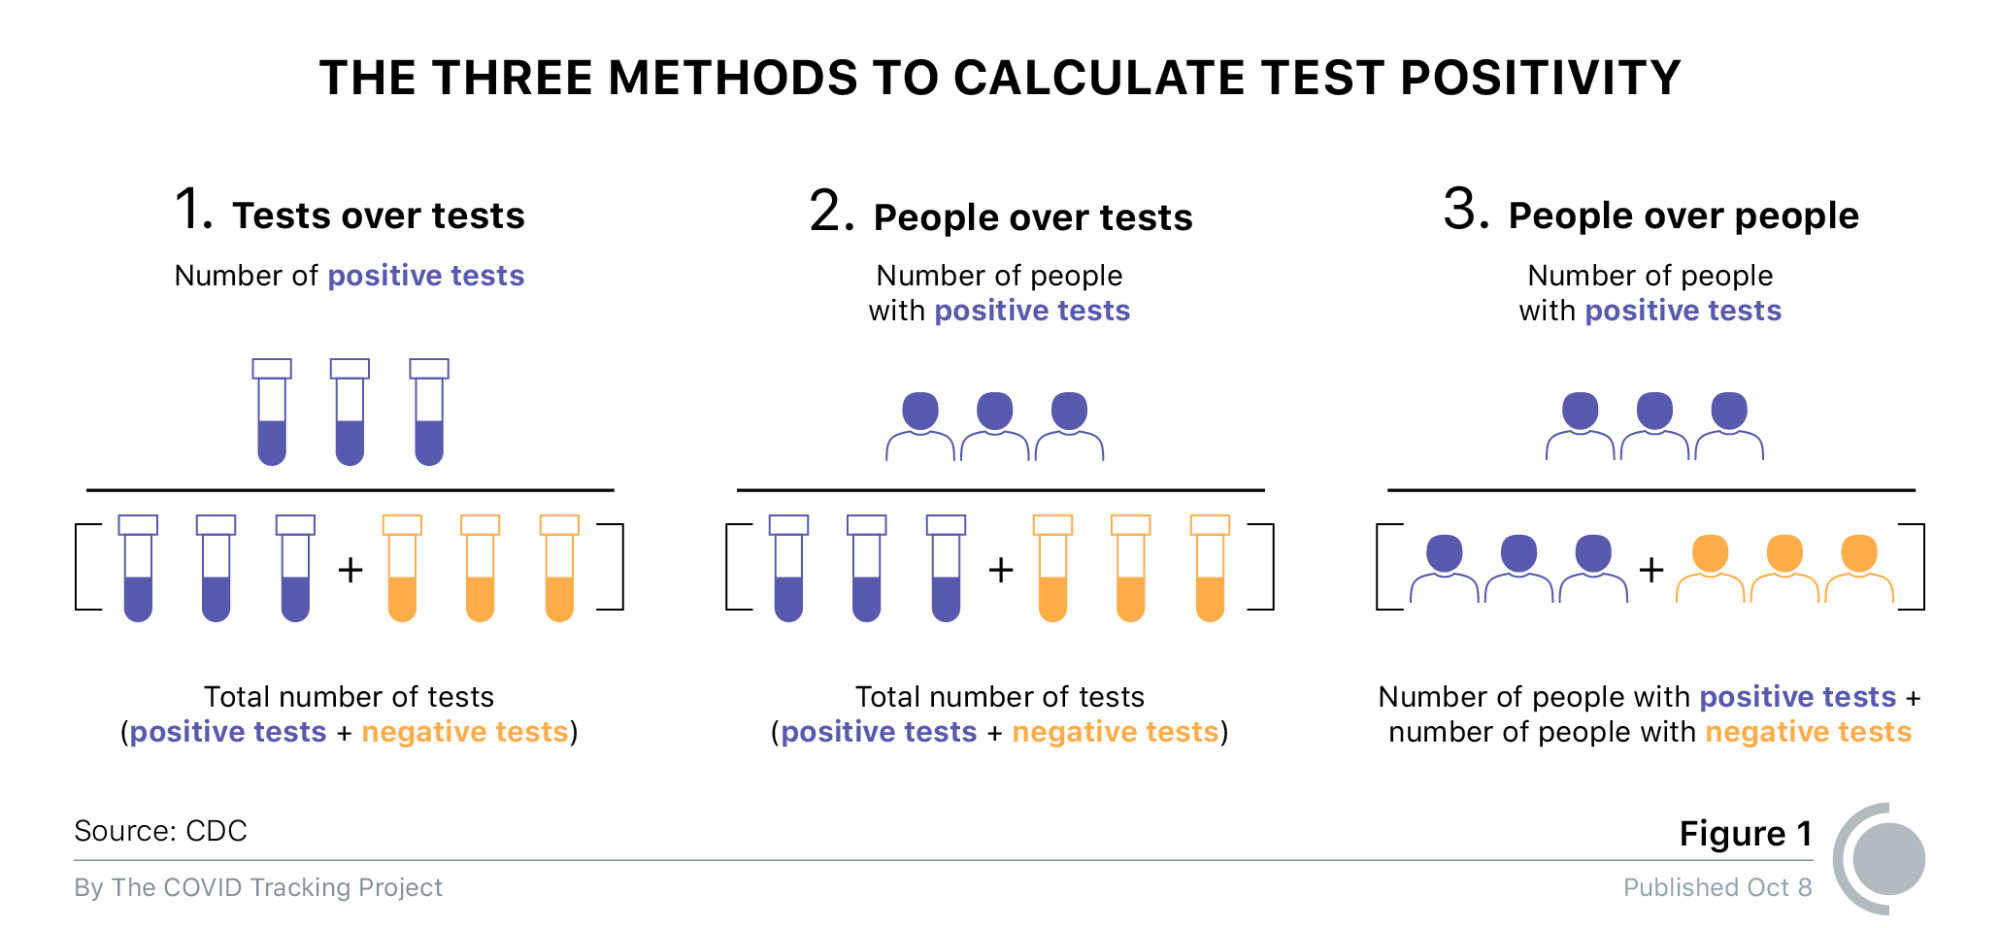 Graphic depicting the three methods for calculating test positivity, as outlined by the US Centers for Disease Control and Prevention. Method 1 is 